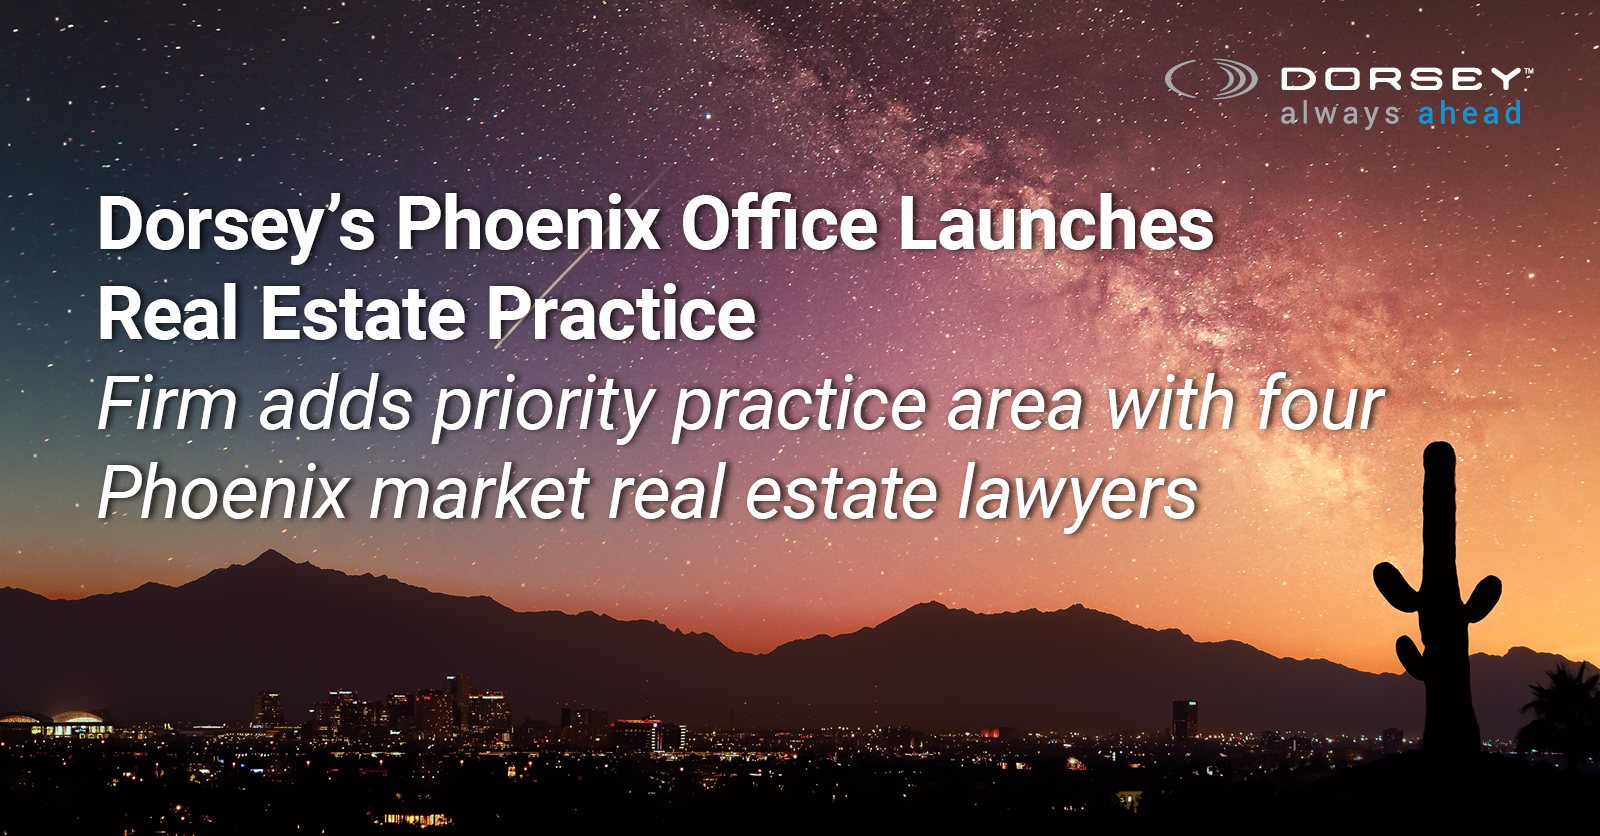 Phoenix Office Launches Real Estate Practice